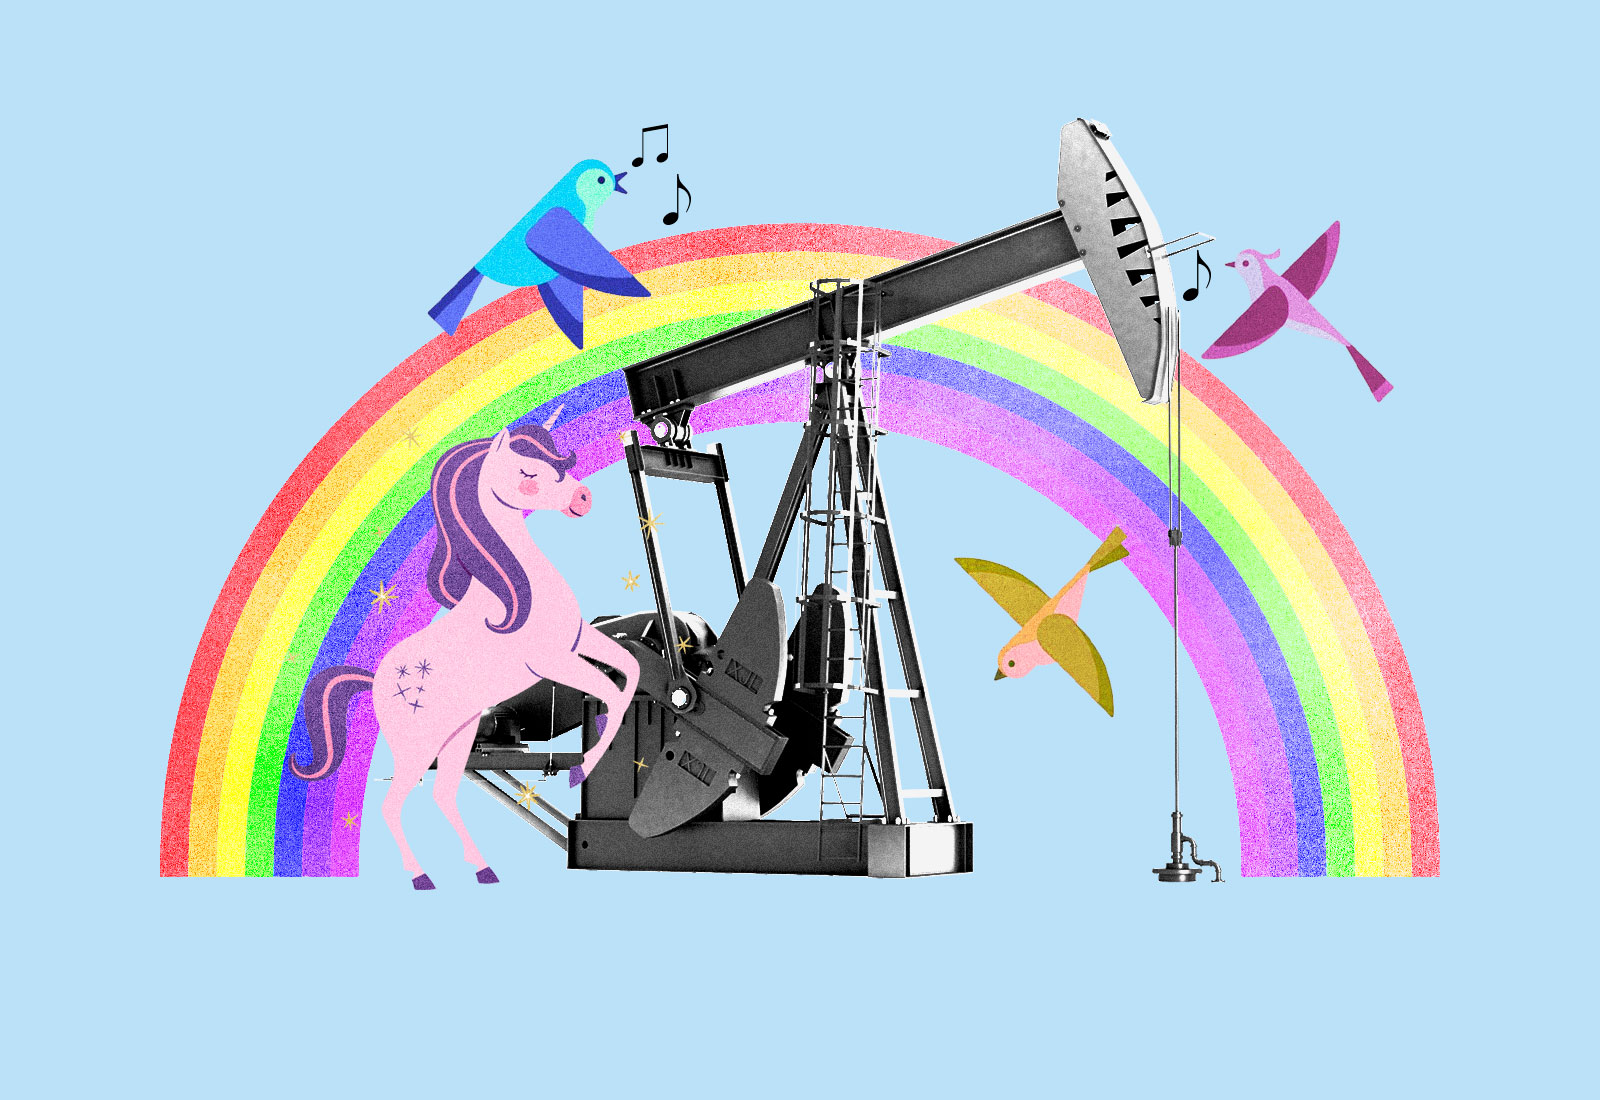 Collage: an oil pumpjack surrounded by a rainbow, a unicorn, and songbirds